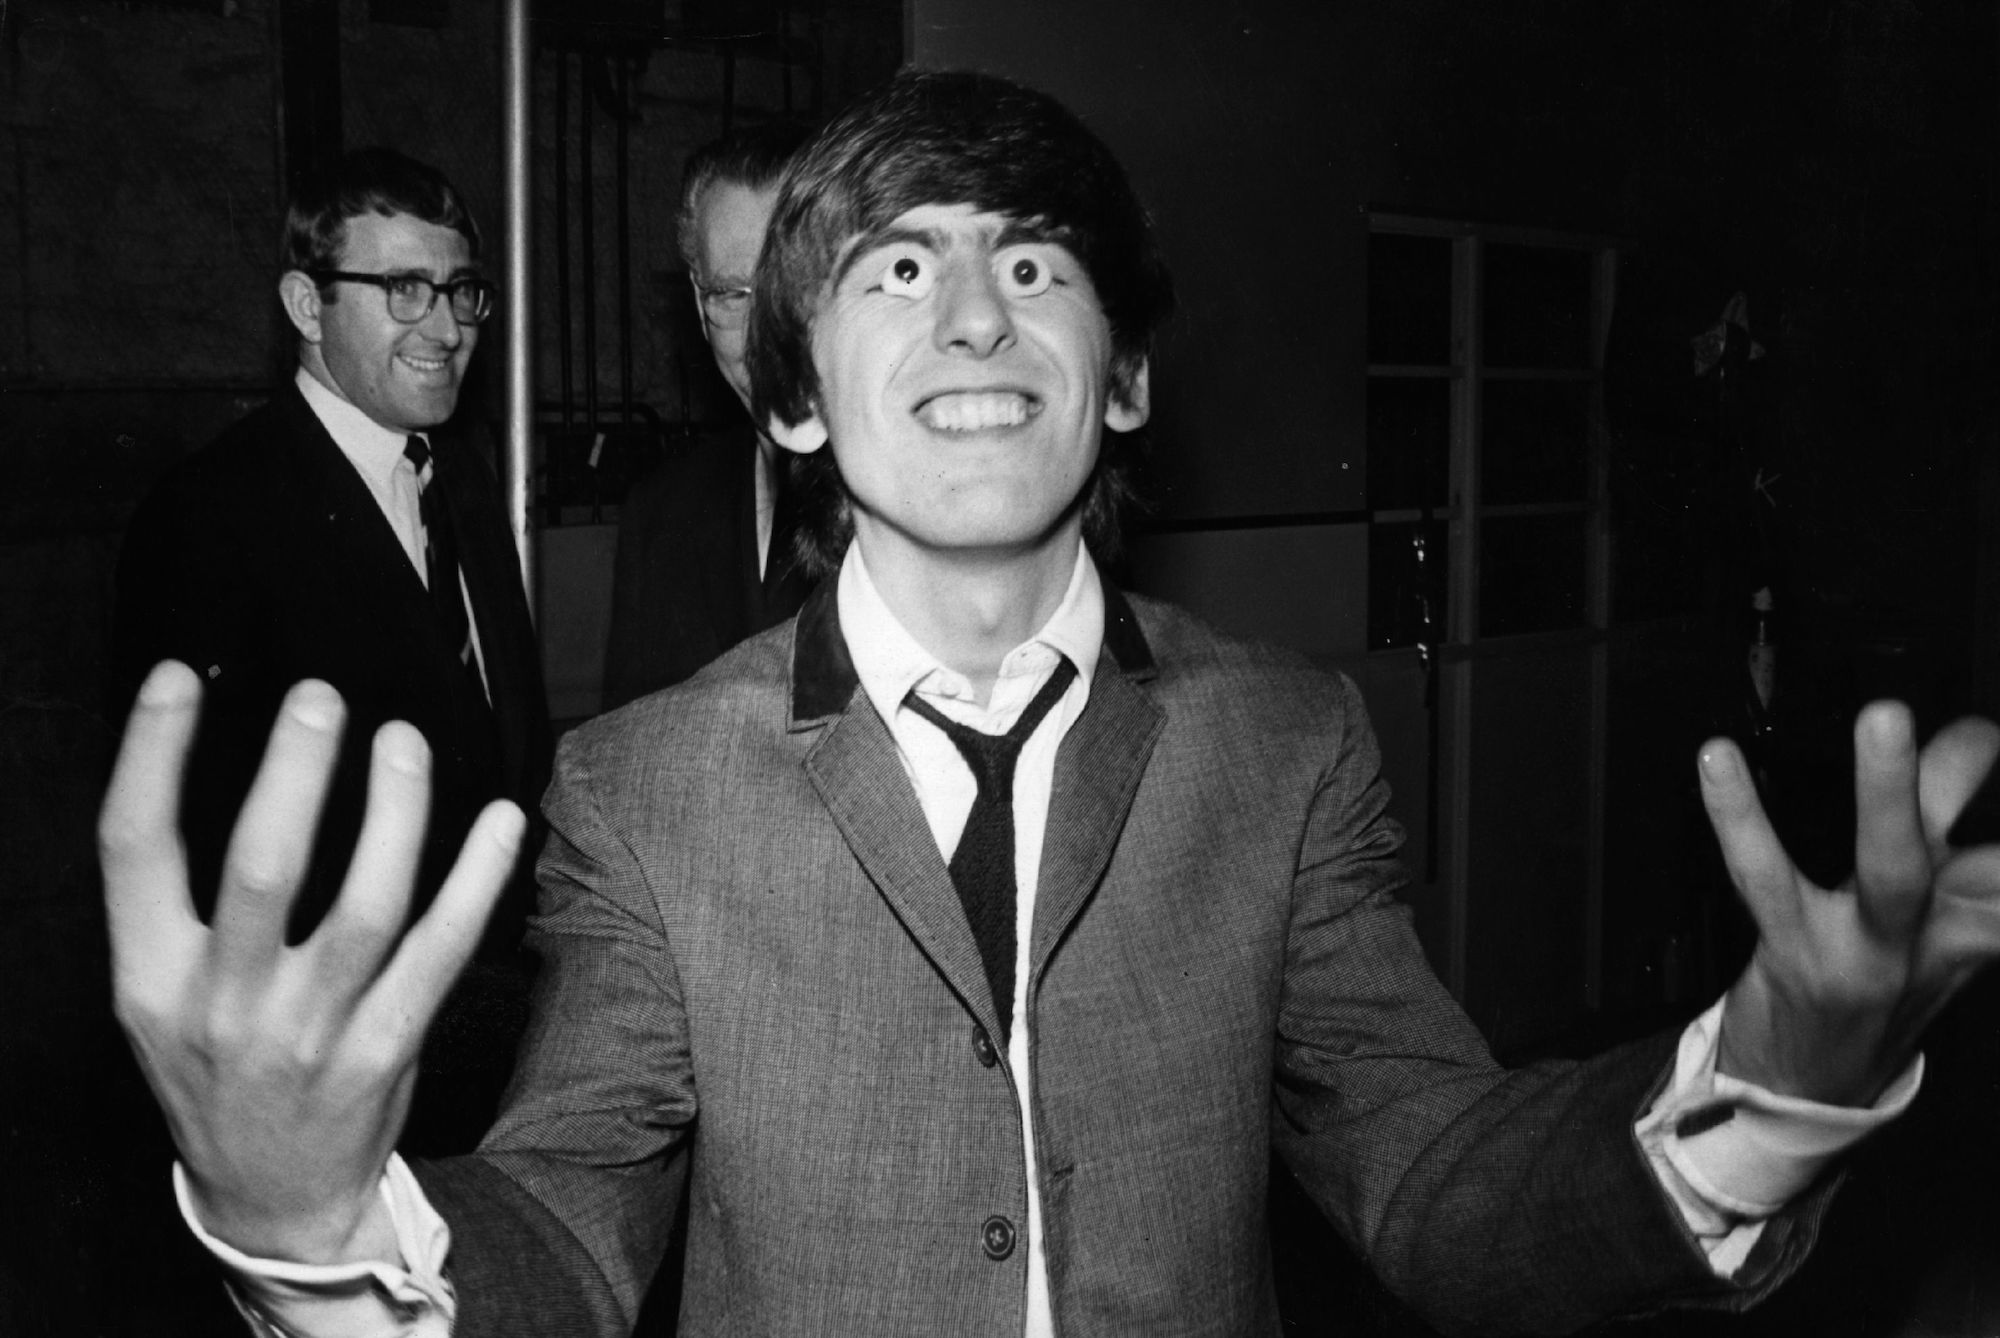 The Beatles George Harrison with fake eyes